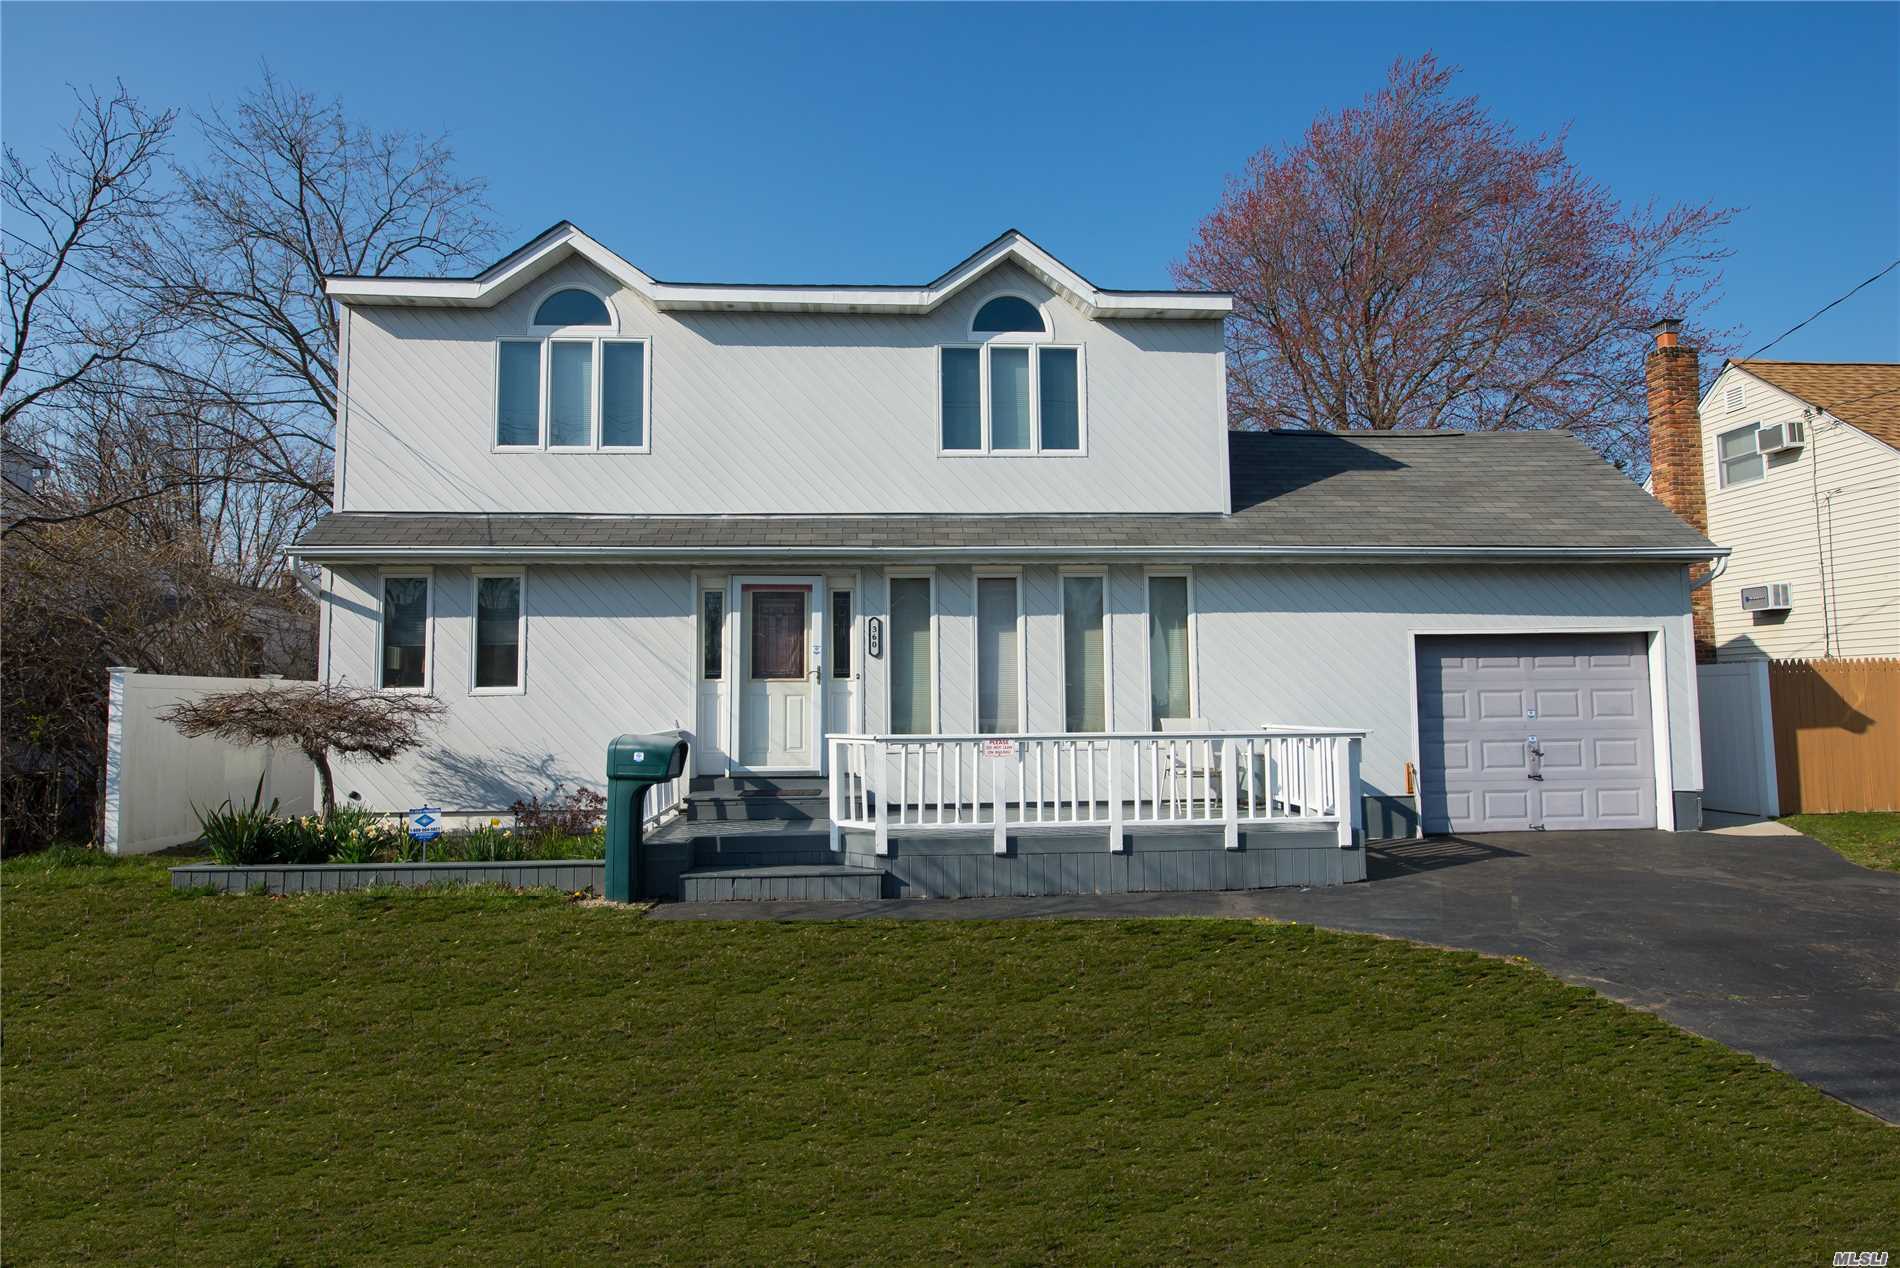 Expanded Cape W/Rear Extension Across Bedroom & Kitchen. Master Suite W/Sitting Room. Oak Floors Throughout. Stainless Steel Kitchen W/Beautifully Updated, Finished Basement With Wet Bar & Bath. Cac, New Roof, Rad Ht In Kit, Central Vac, New Hot Water Htr, And More...Don&rsquo;t Miss This Lovely Village Home.